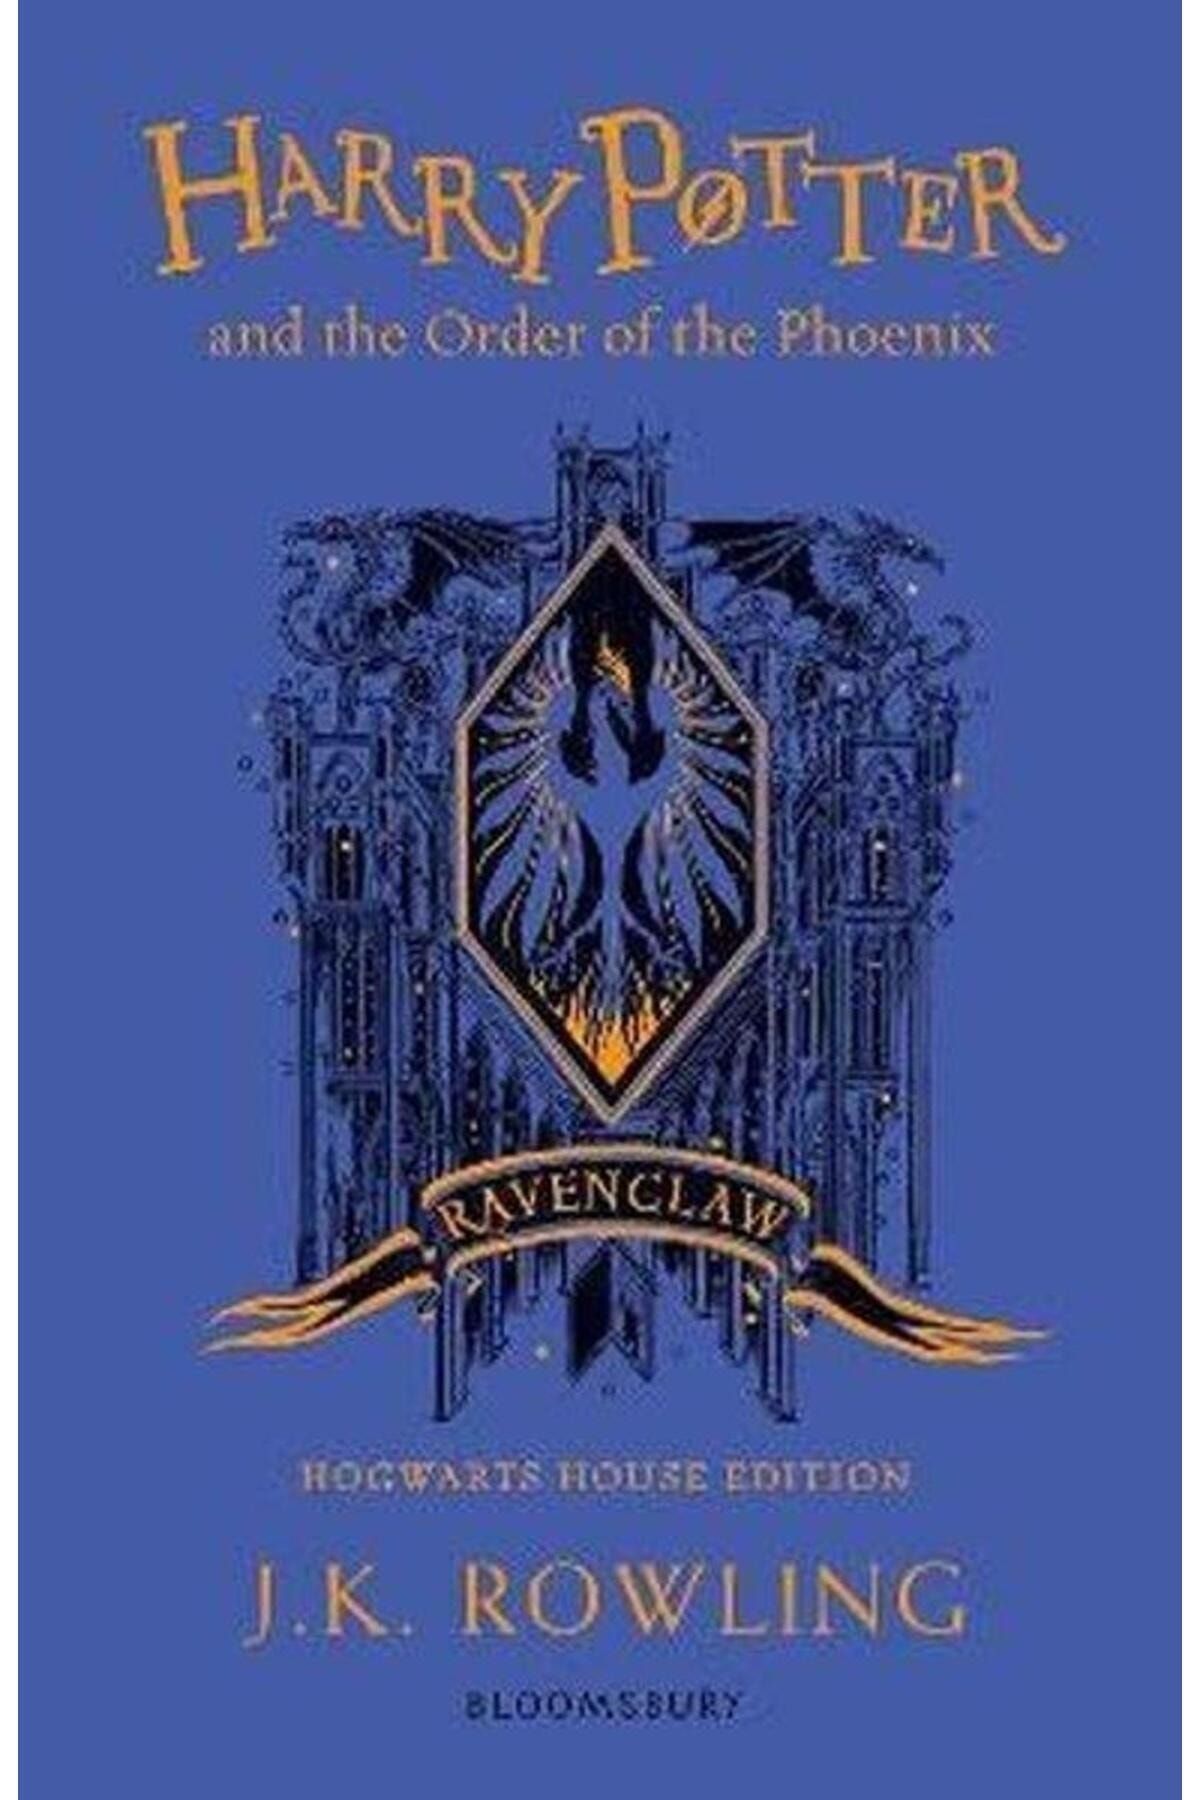 Bloomsbury Harry Potter and the Order of the Phoenix Ravenclaw Edition: J.K. Rowling (Ravenclaw Edition Blue